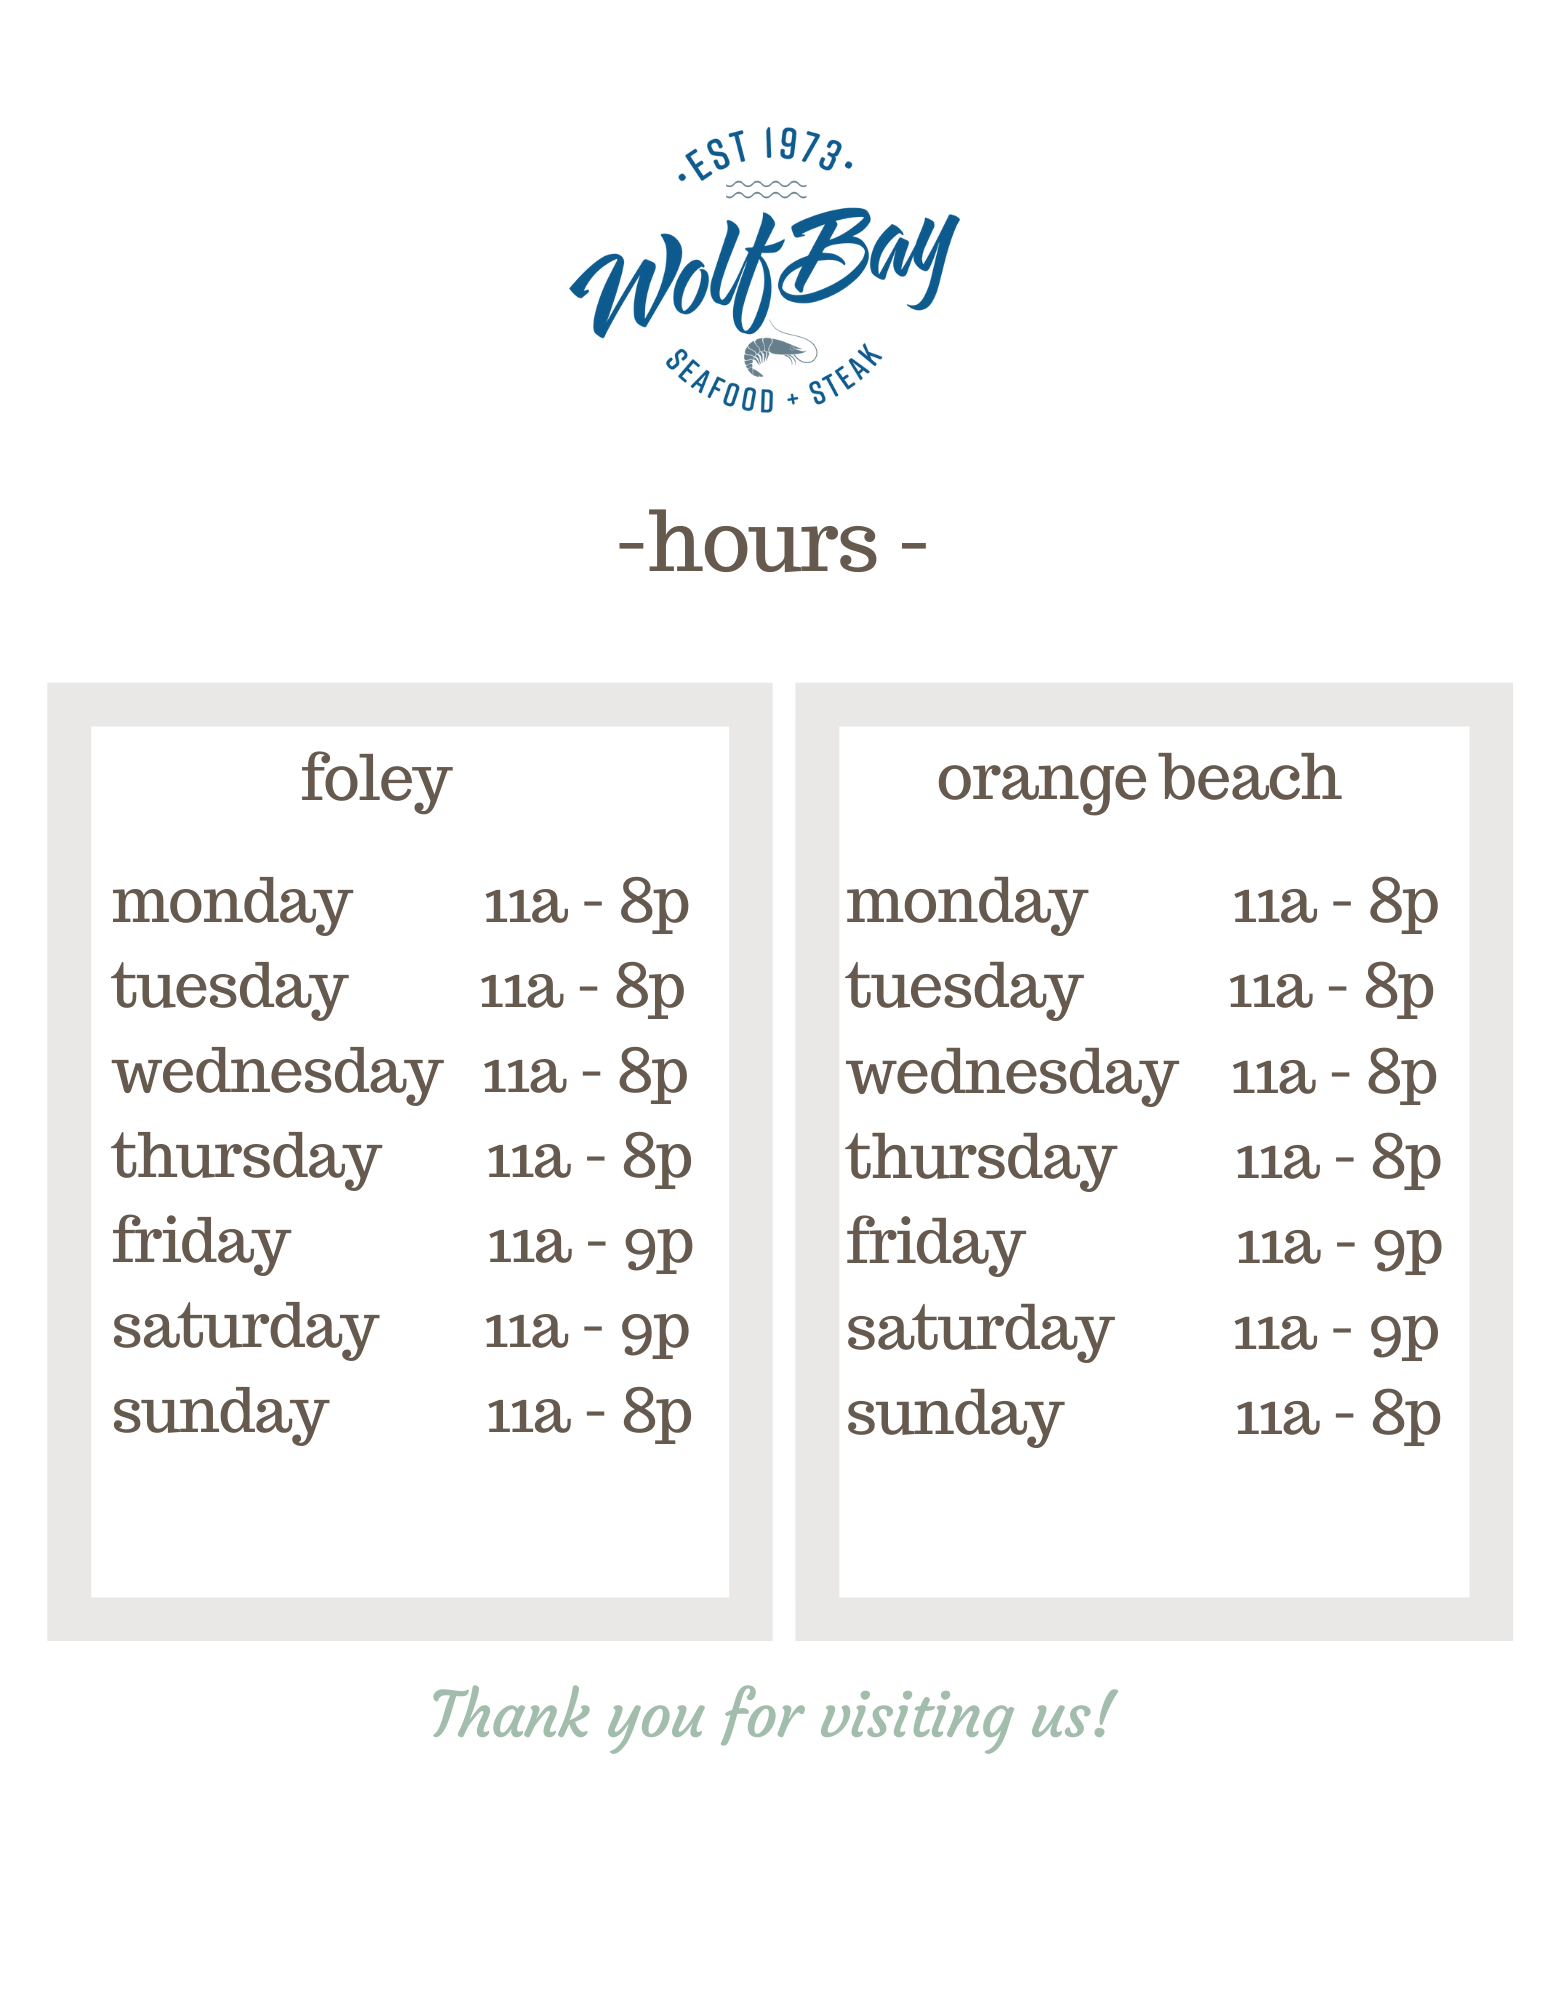 Wolf Bay will offer Fall & Winter hours